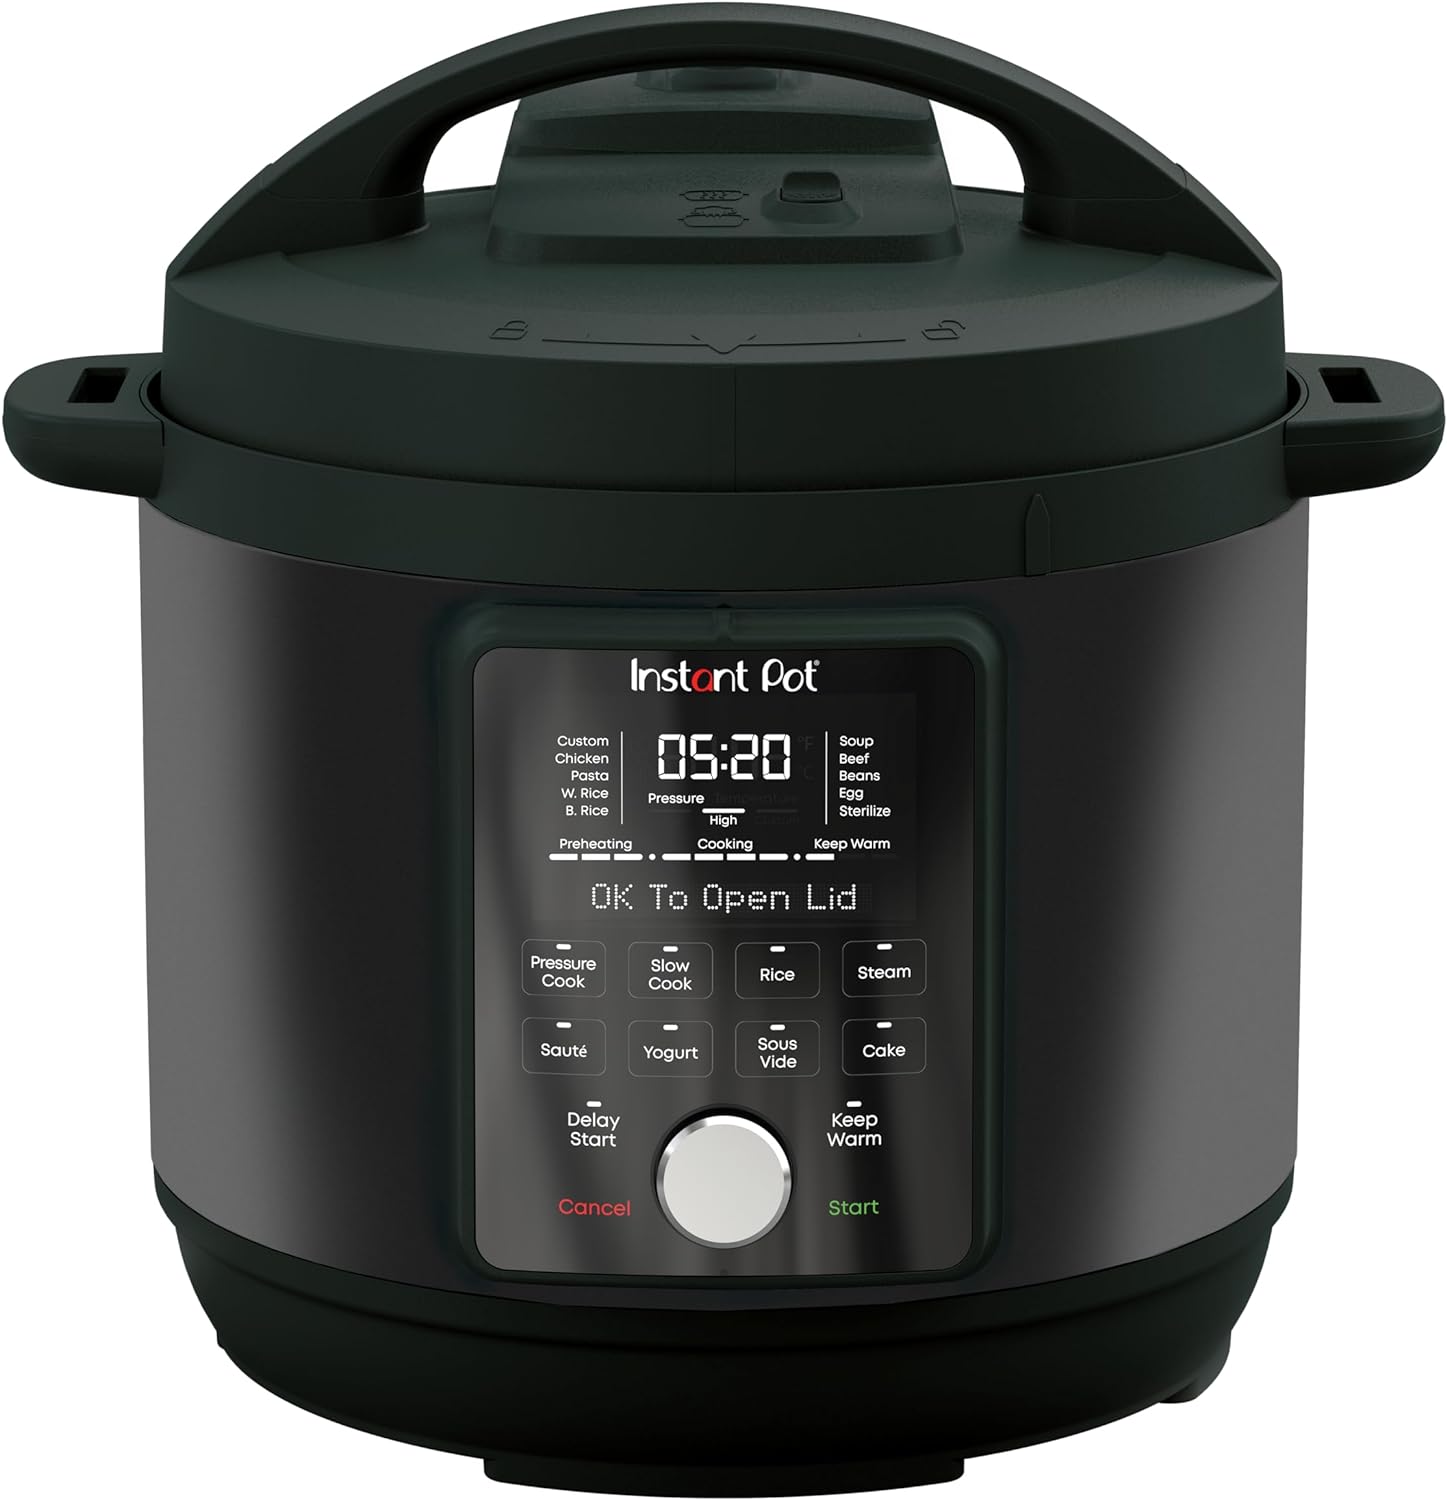 Up To 12% Off on Instant Pot DUO Plus 6qt 9-in